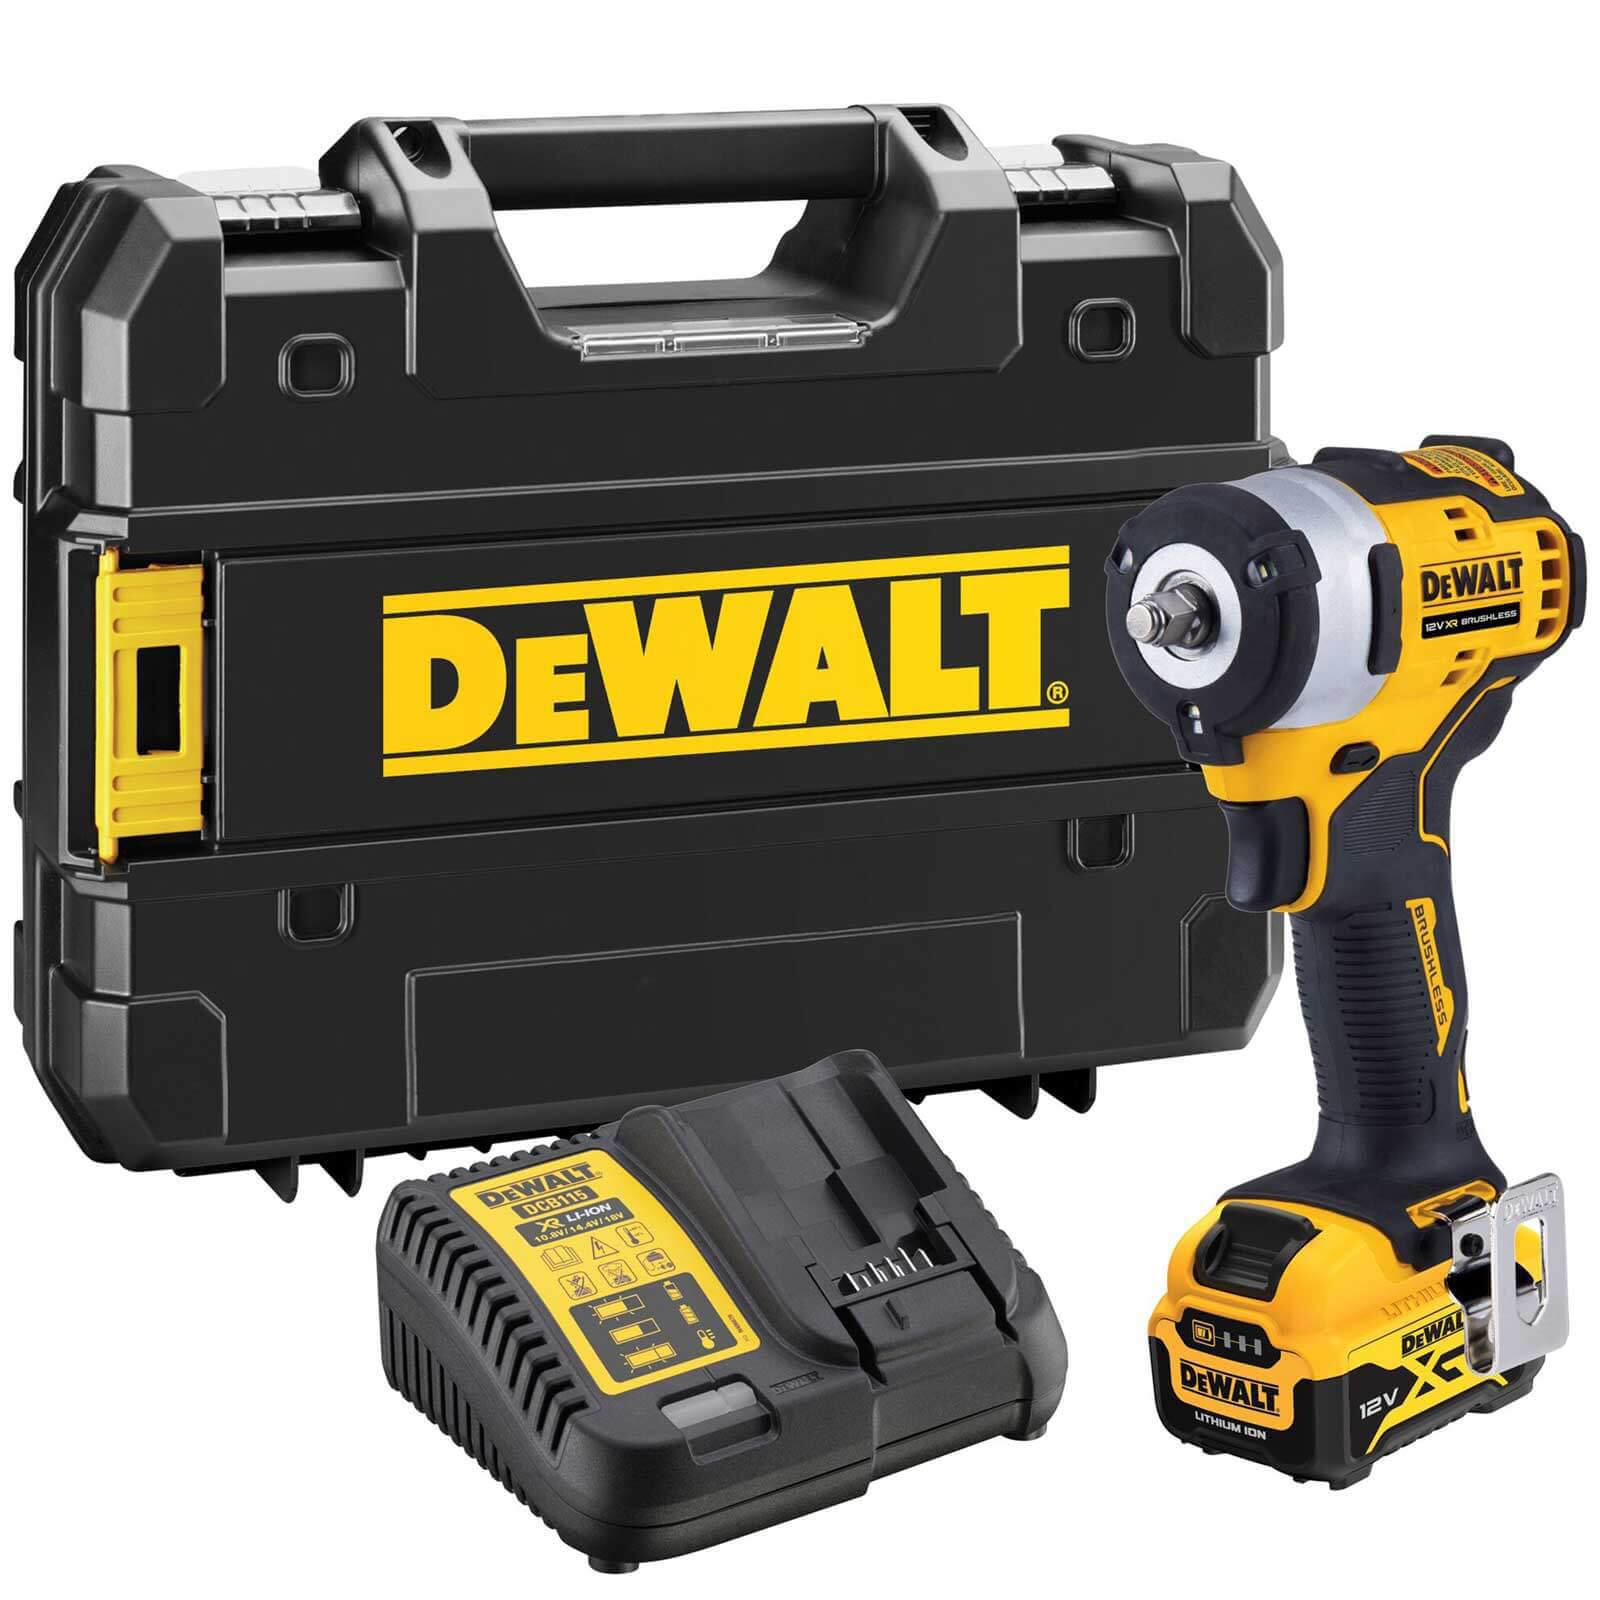 DeWalt DCF903 12v XR Cordless Brushless Compact 3/8" Drive Impact Wrench 1 x 5ah Li-ion Charger Case